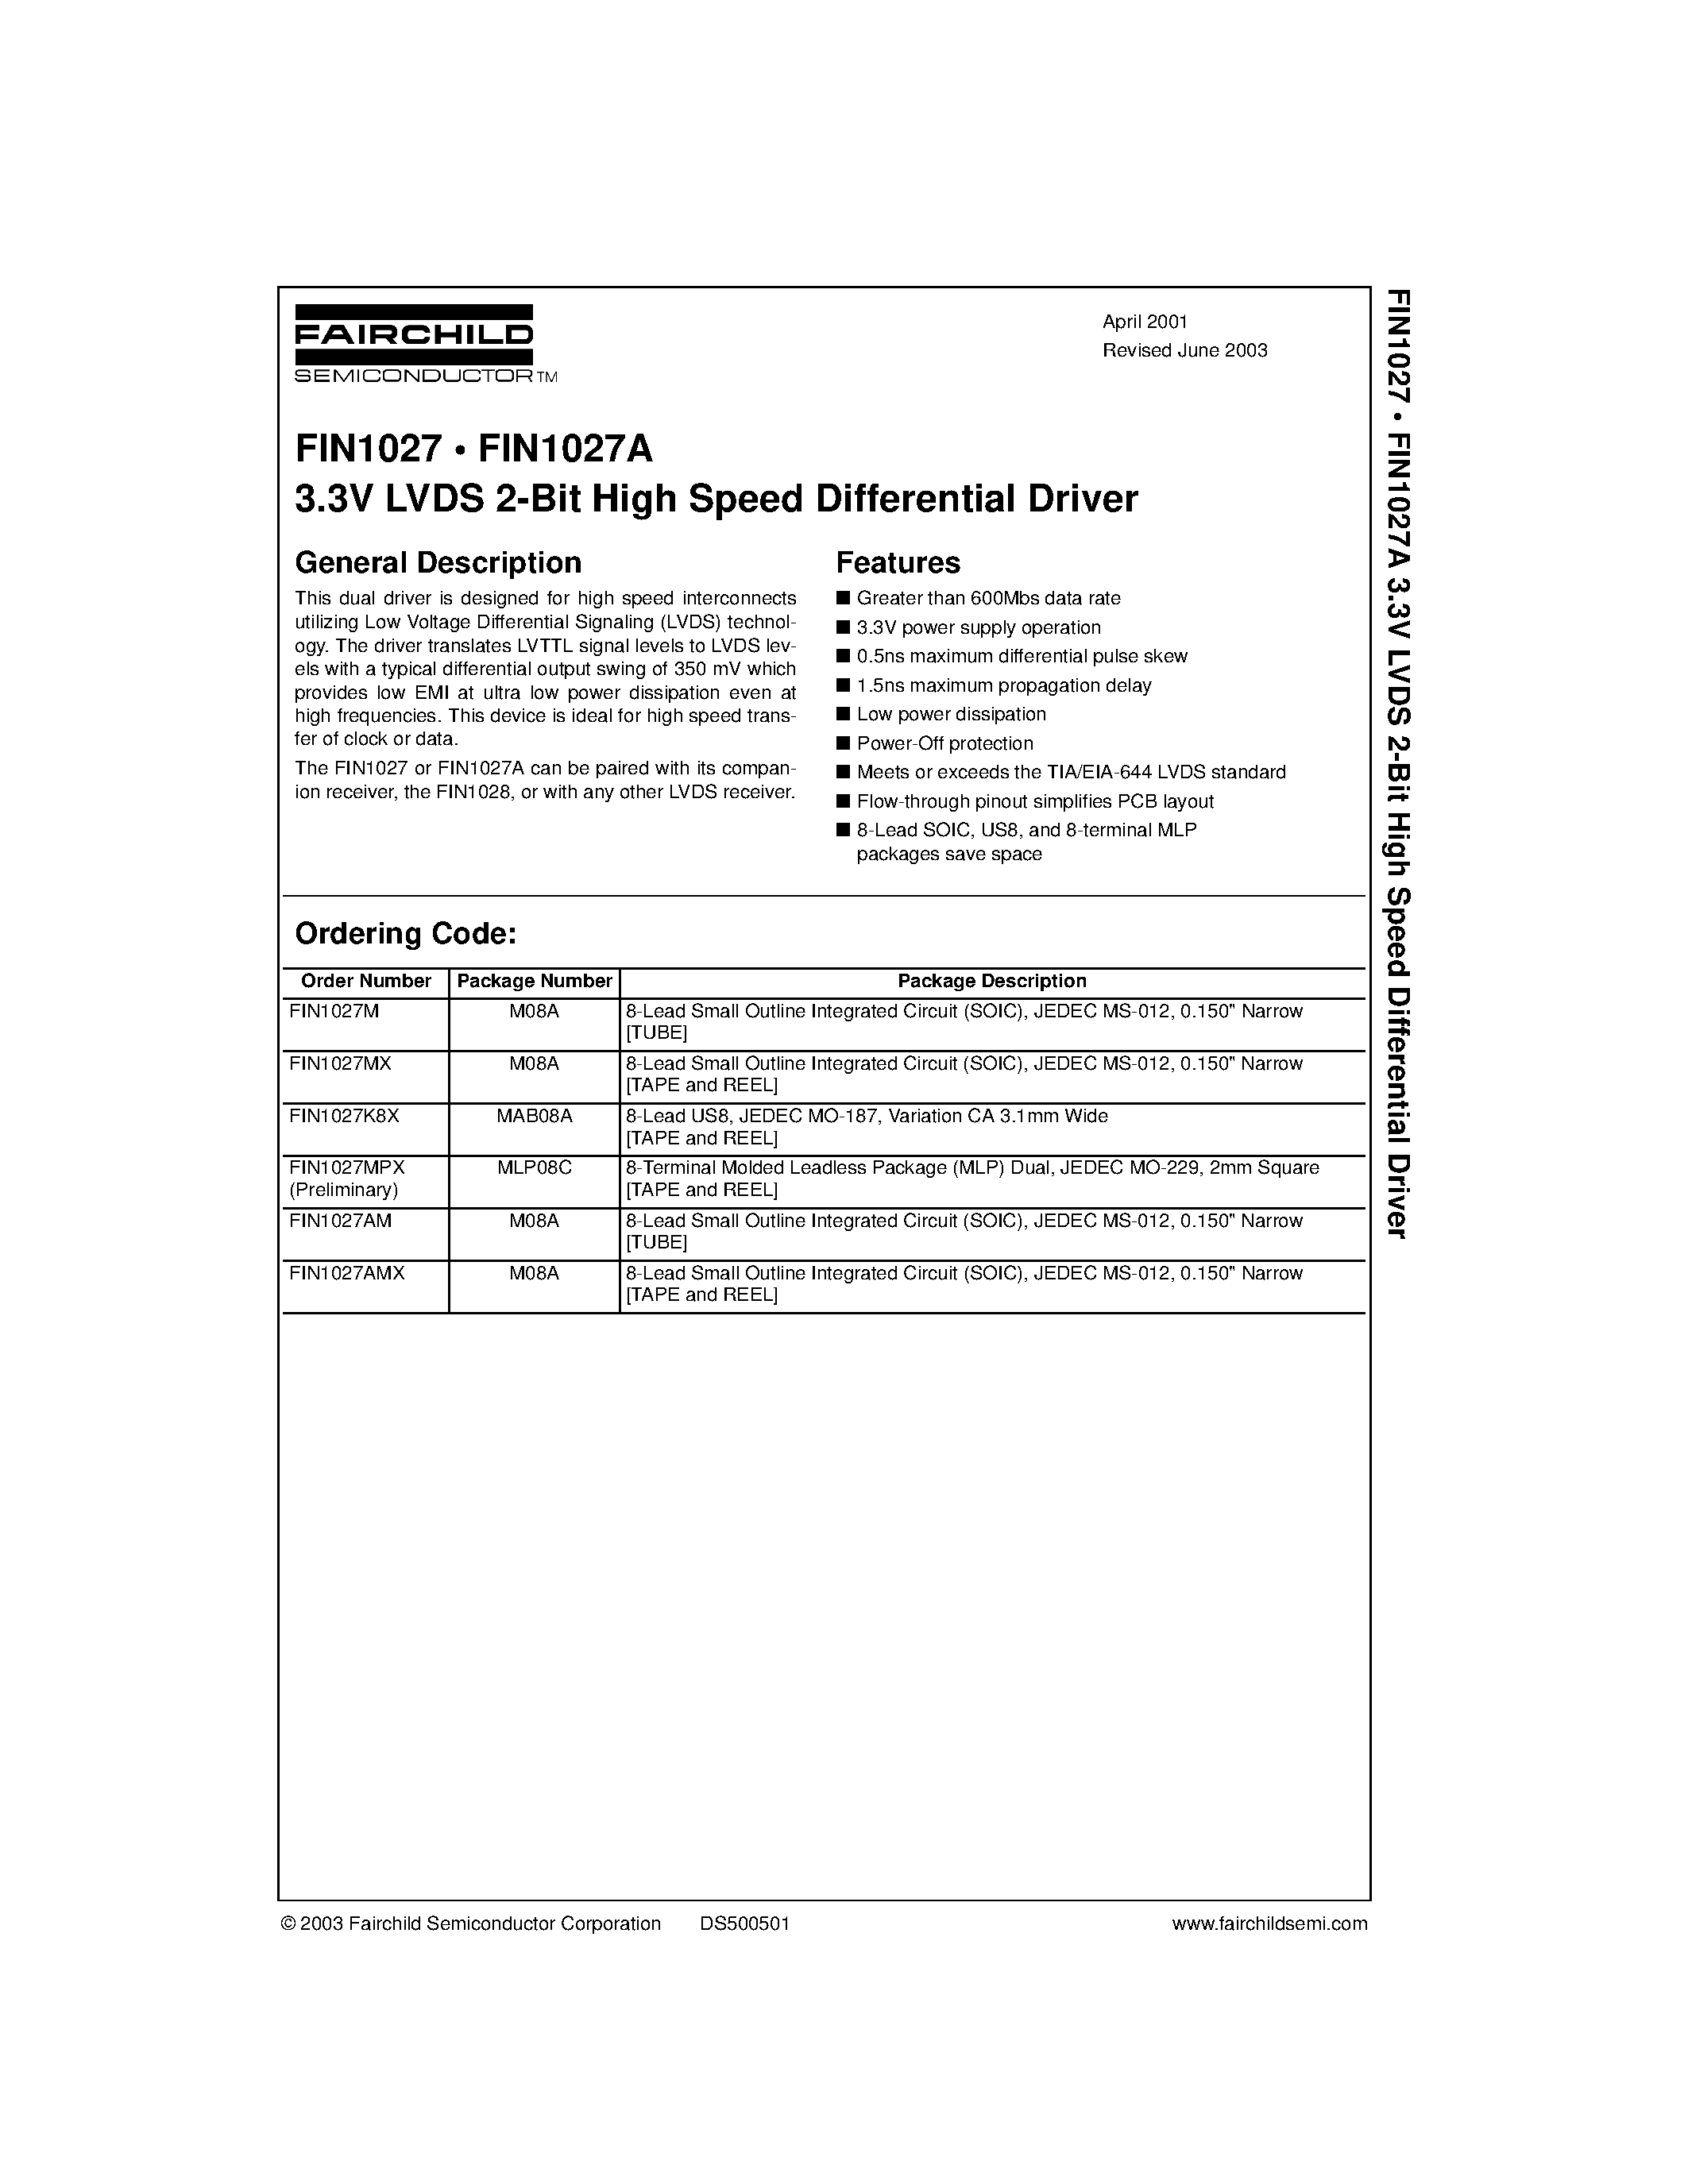 Datasheet FIN1027 - 3.3V LVDS 2-Bit High Speed Differential Driver page 1